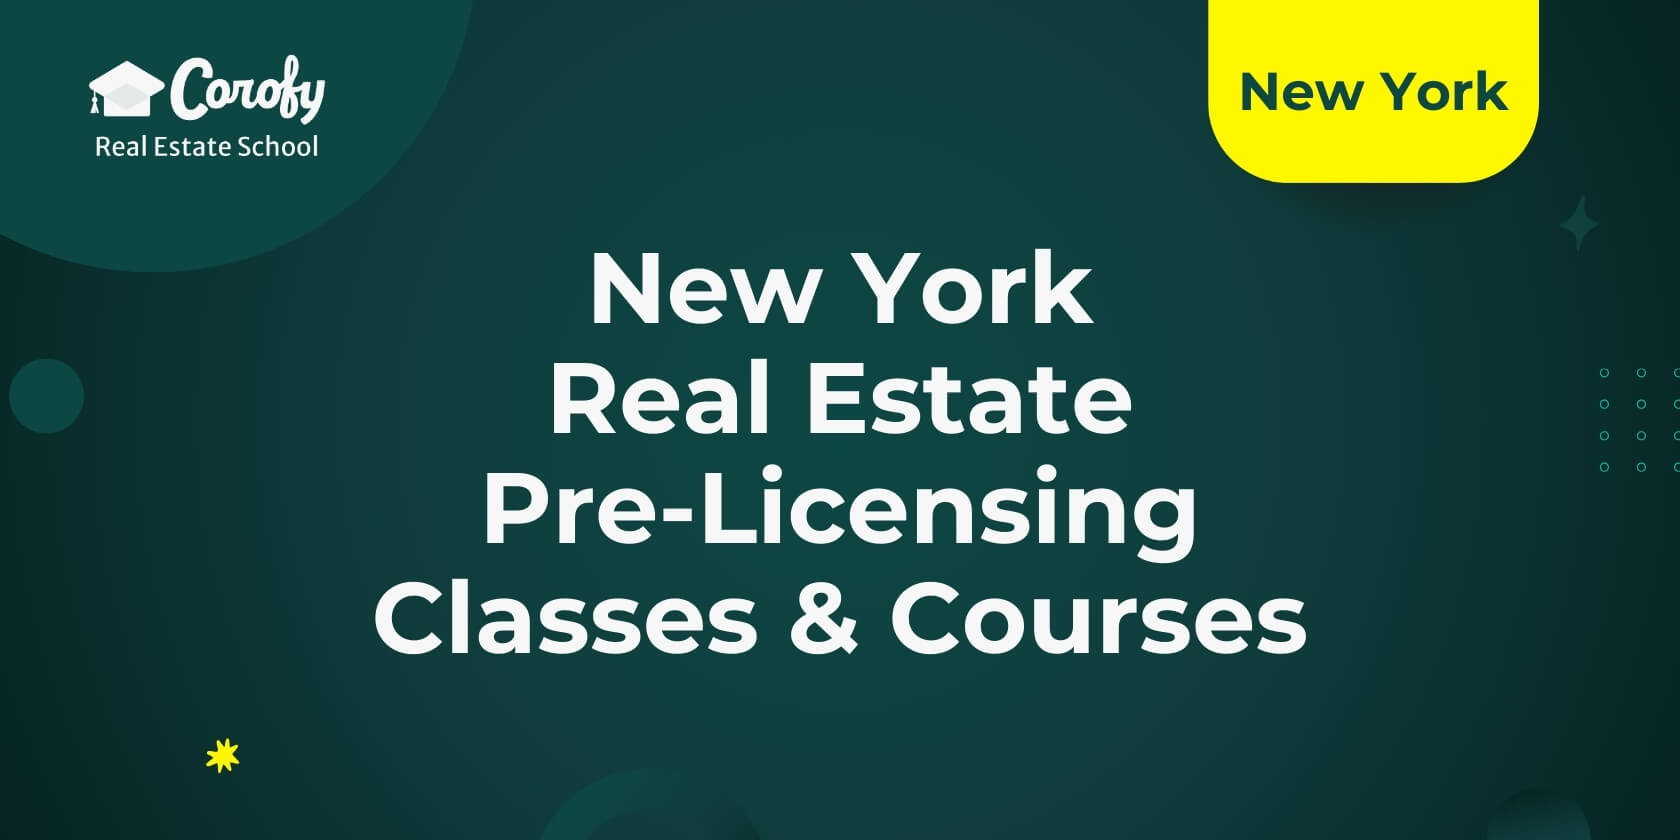 Real Estate Pre-Licensing Classes & Courses